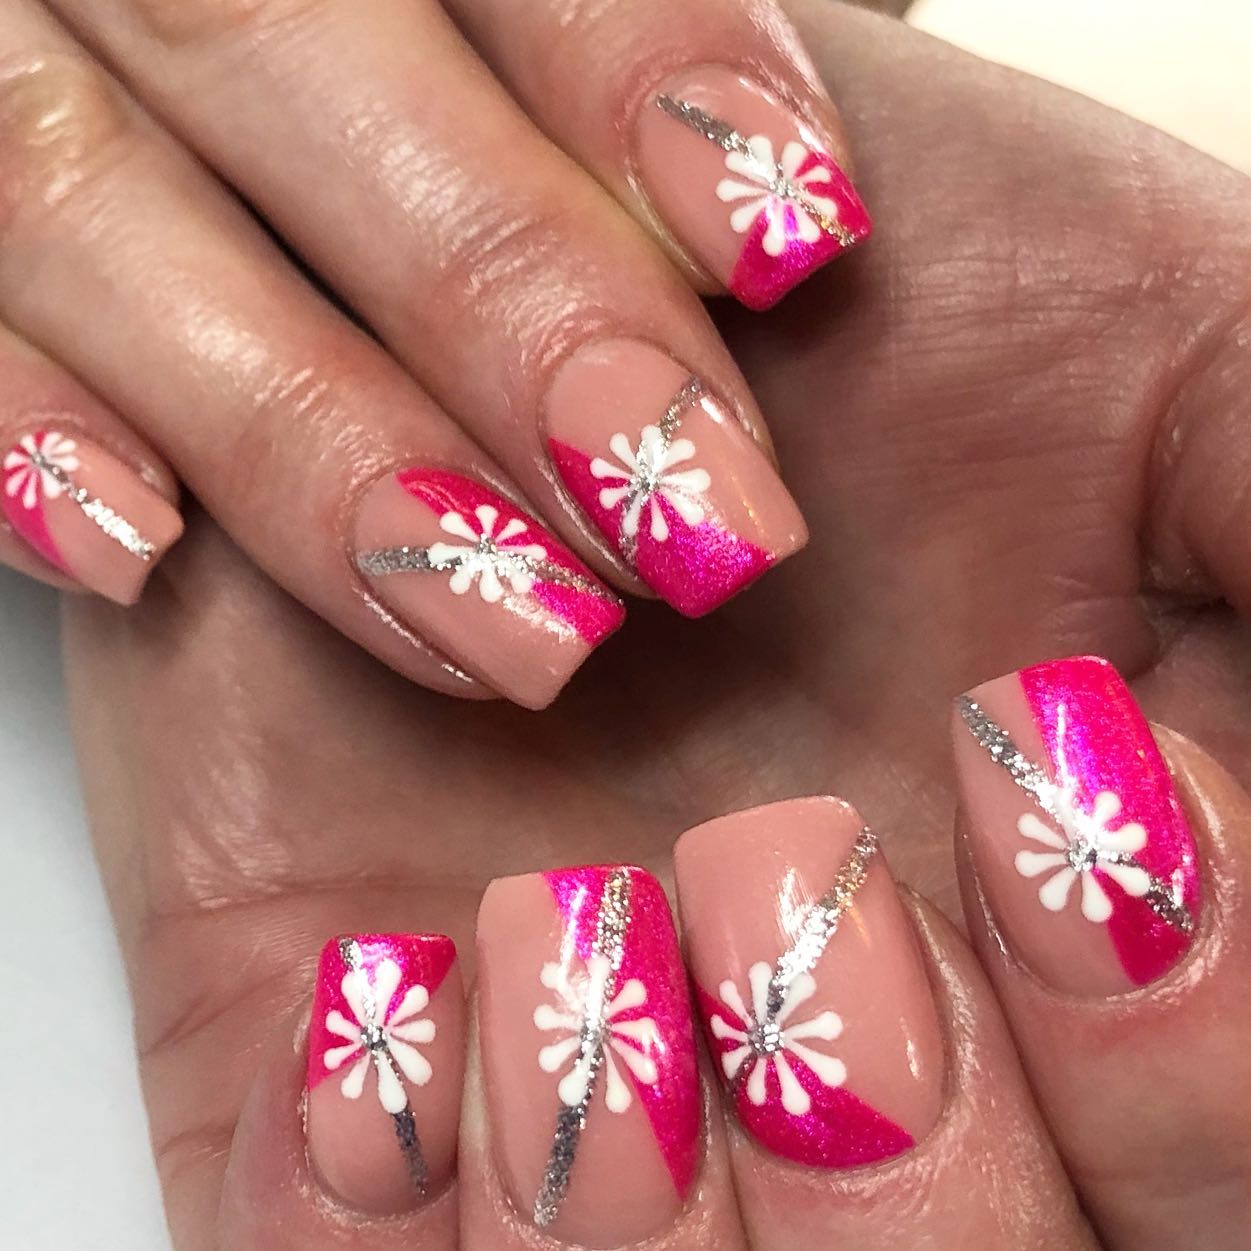  Geometric daisies with a silver glitter and dark pink nail art are quite spectacular. If you want everyone to notice you, go for this nail design.